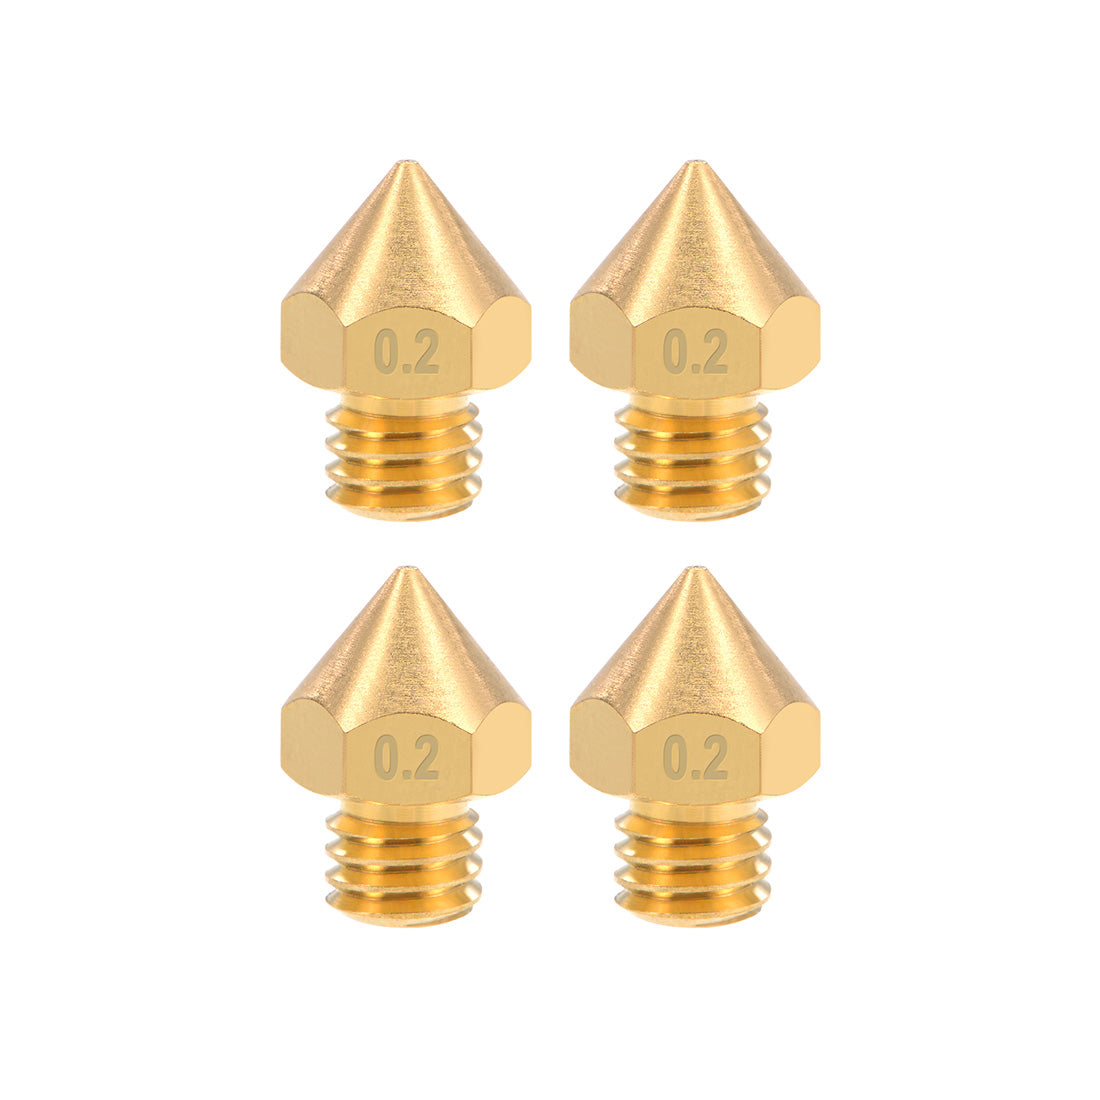 uxcell Uxcell 0.2mm 3D Printer Nozzle Head M6 for MK8 1.75mm Extruder Print, Brass 4pcs